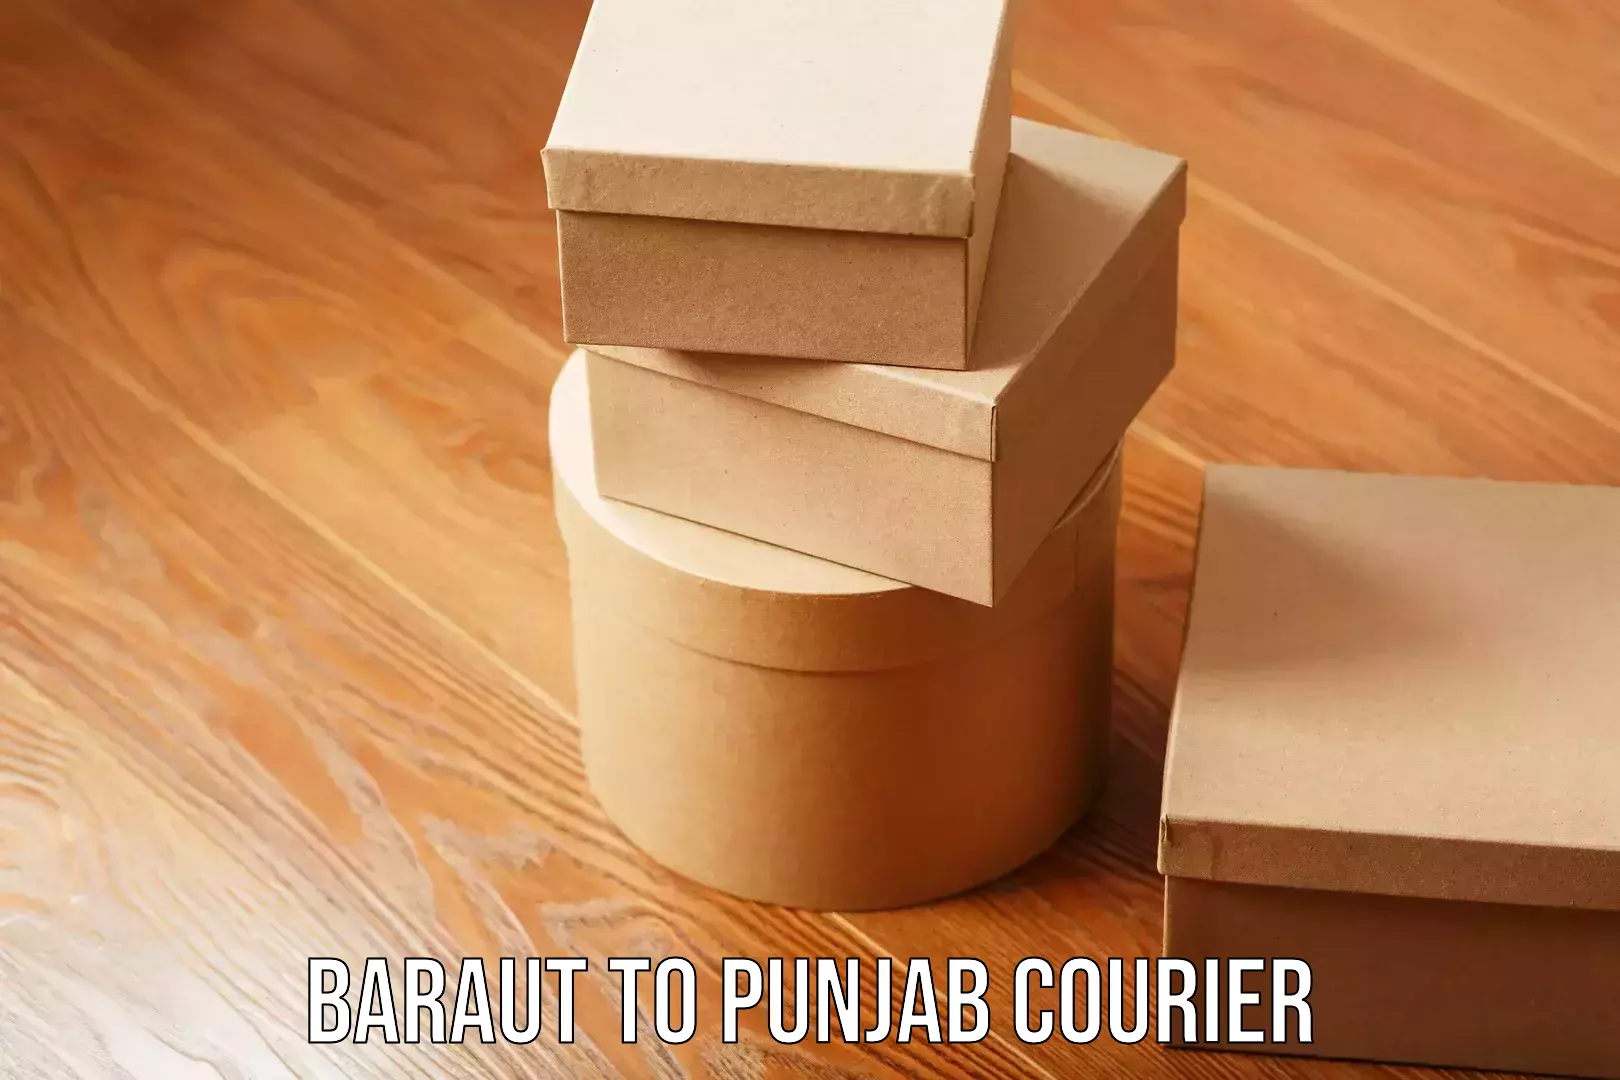 Cash on delivery service Baraut to Punjab